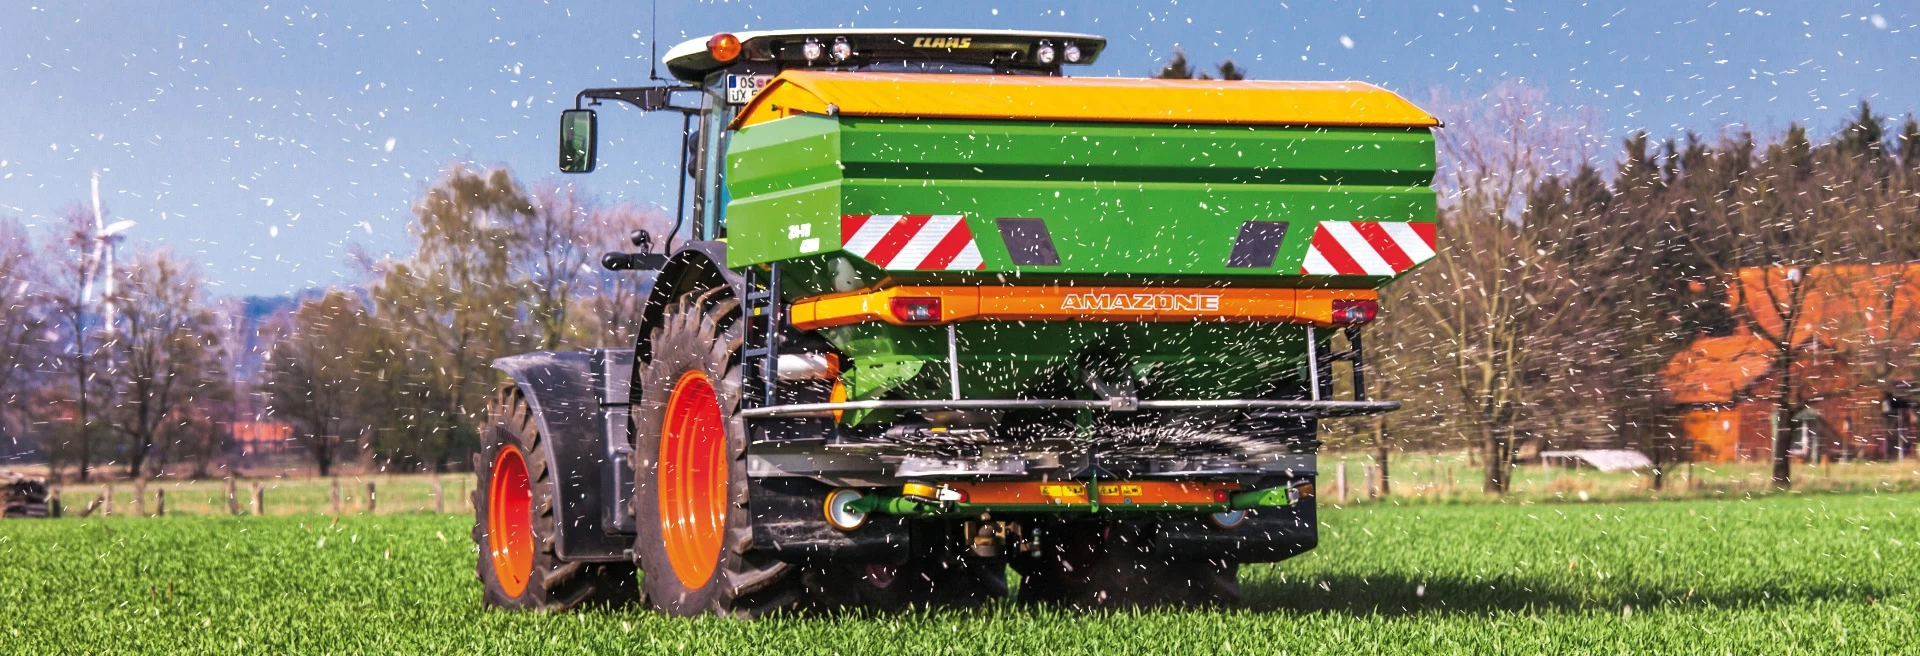 Sprayers and Spreaders for Sale | AMTEC